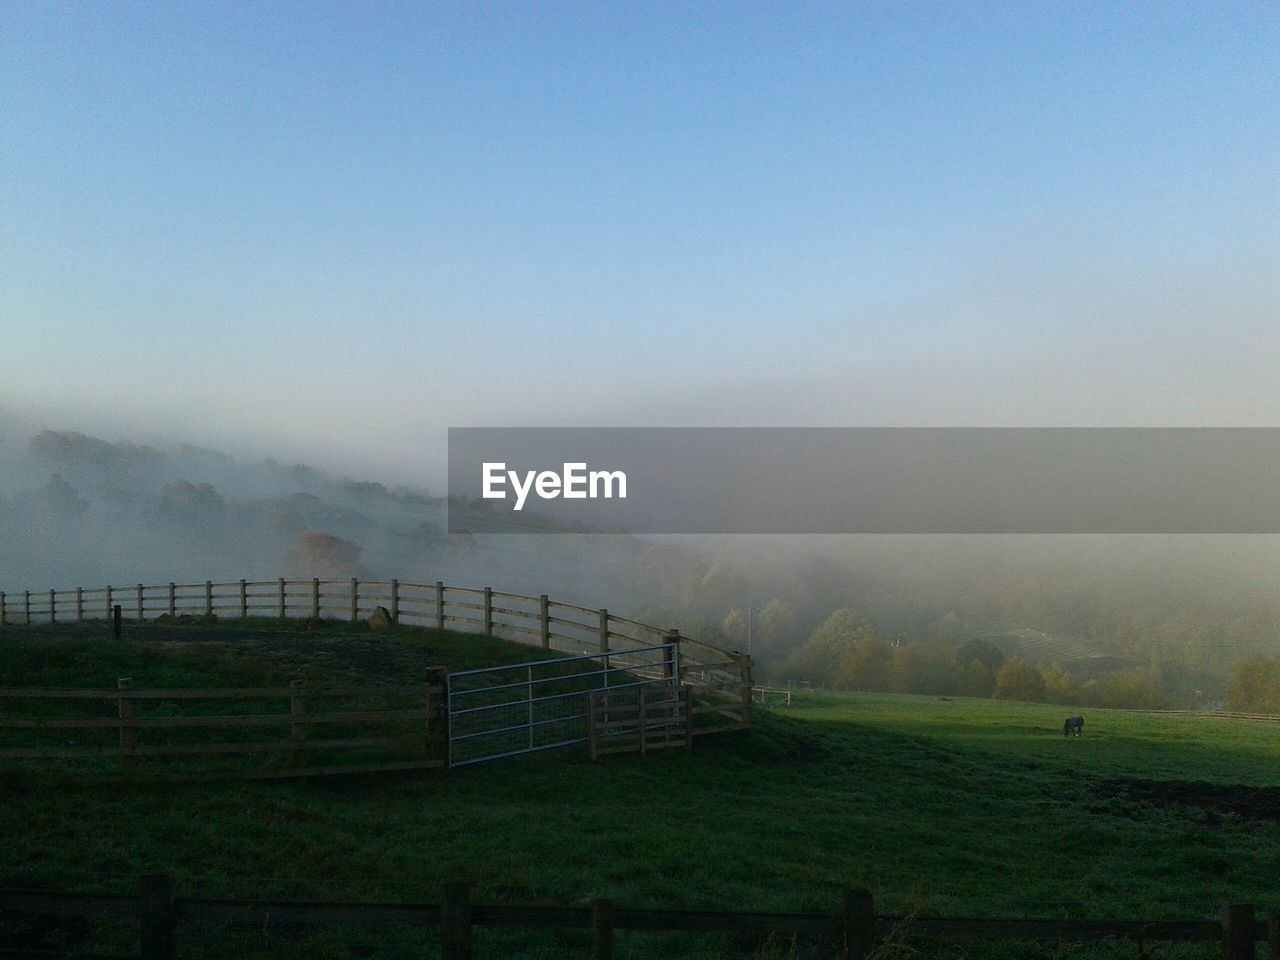 Animal pen on grassy field during foggy weather